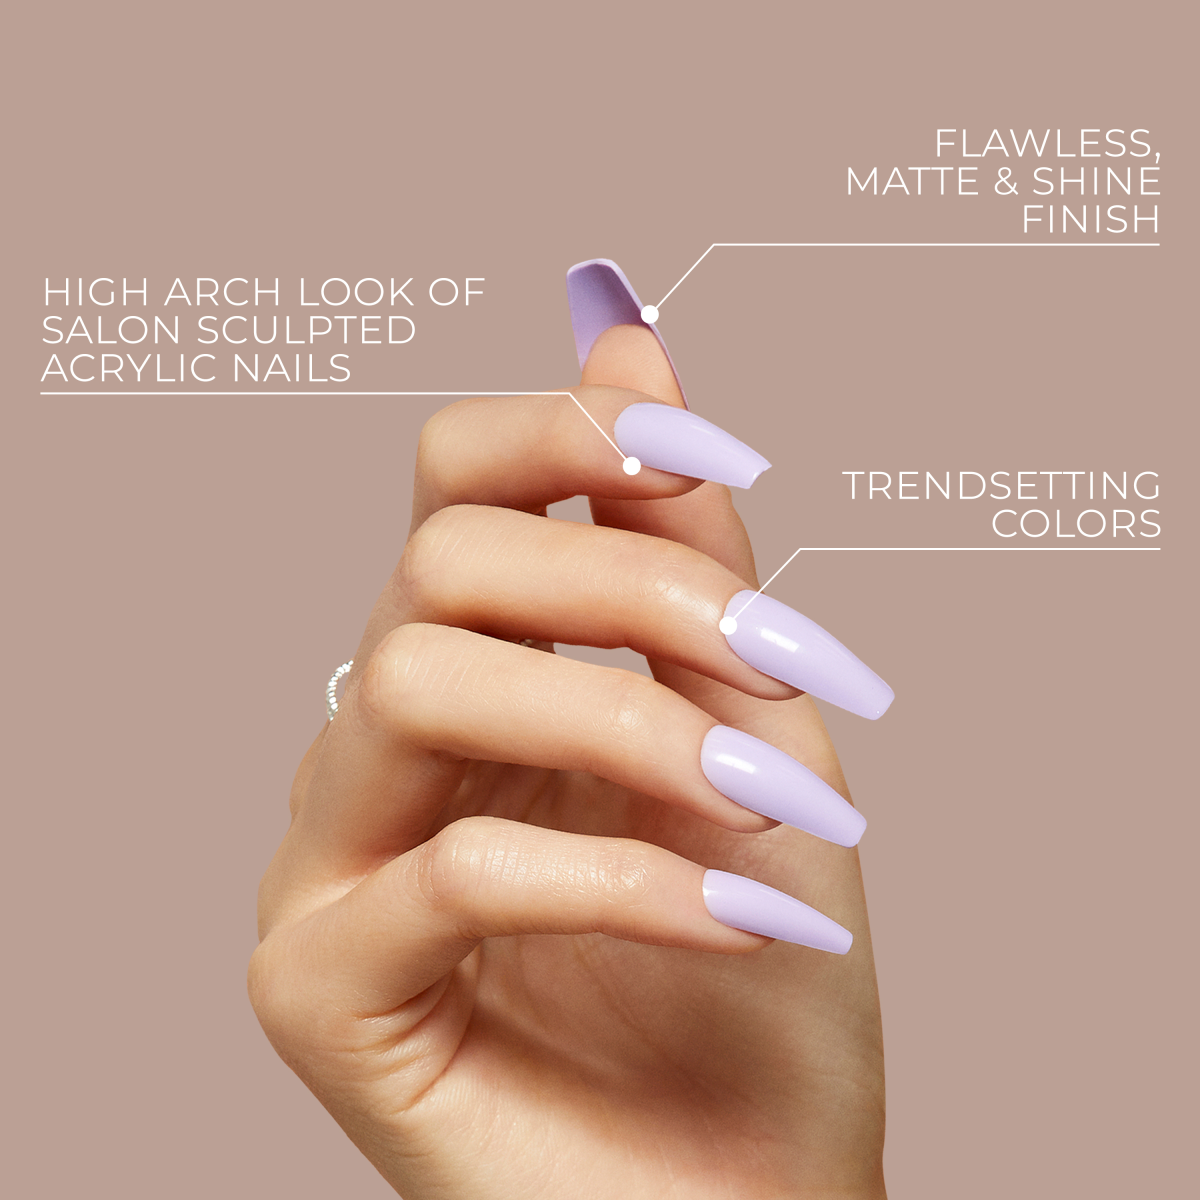 The Newest Manicure Trends Right Now Are Gel, Hybrid Gel, Acrylic Nails